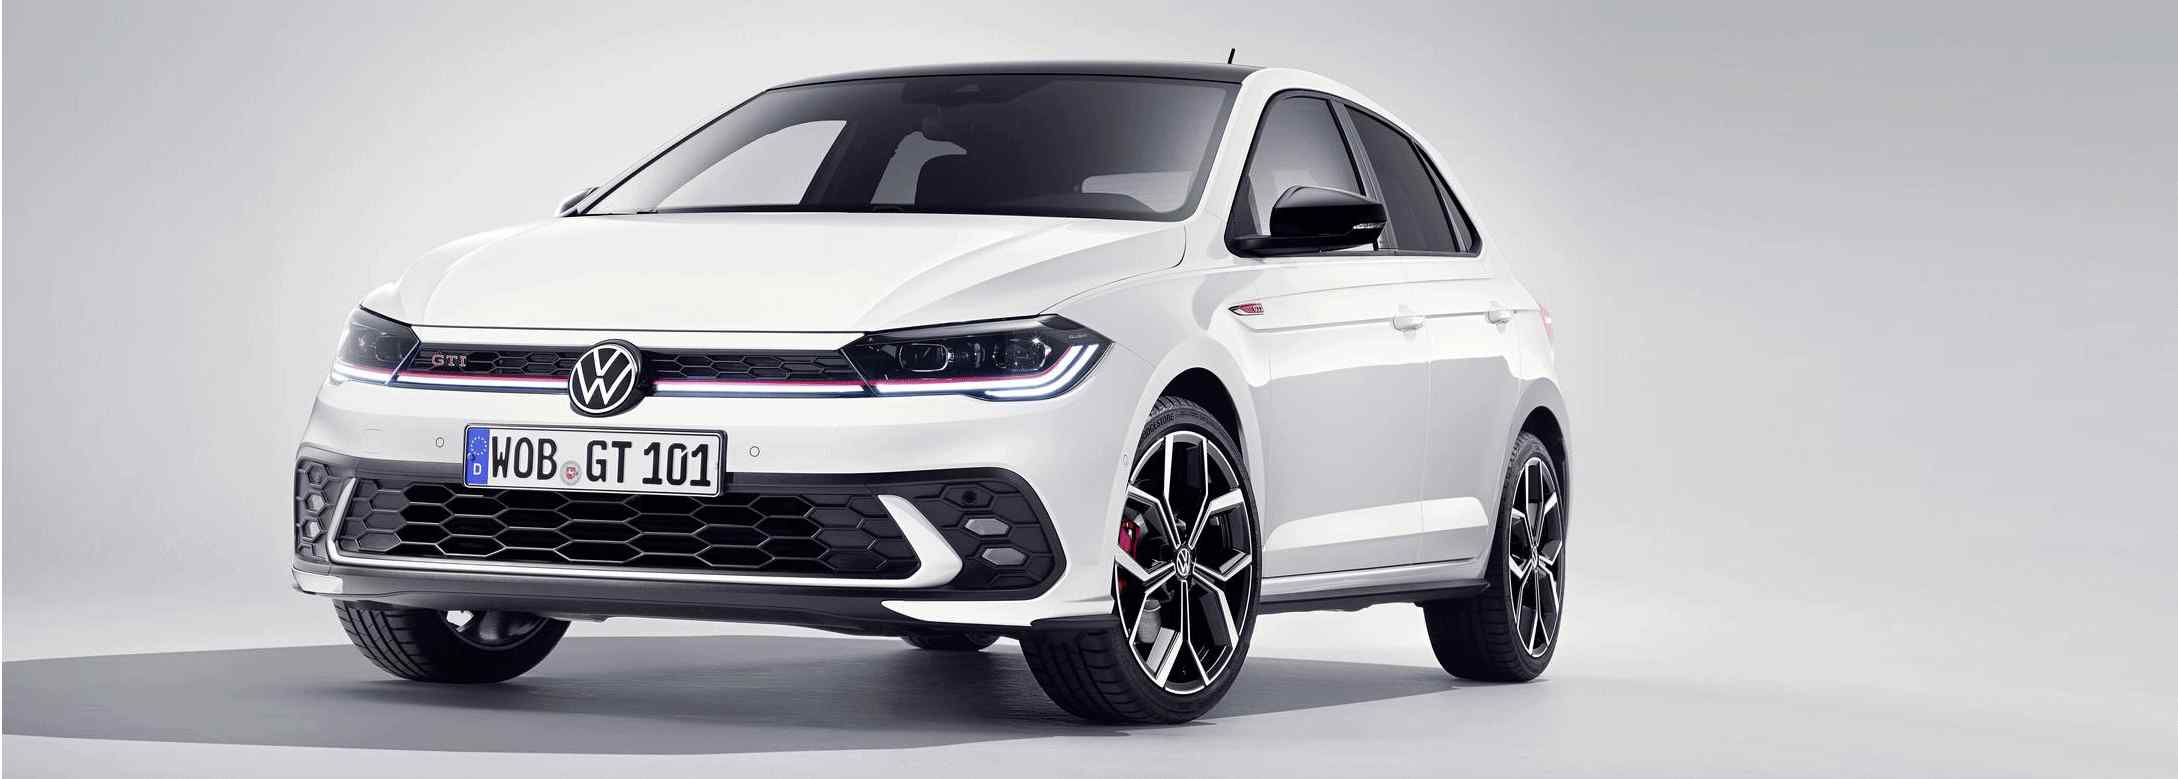 Volkswagens popular Polo has been given a new look